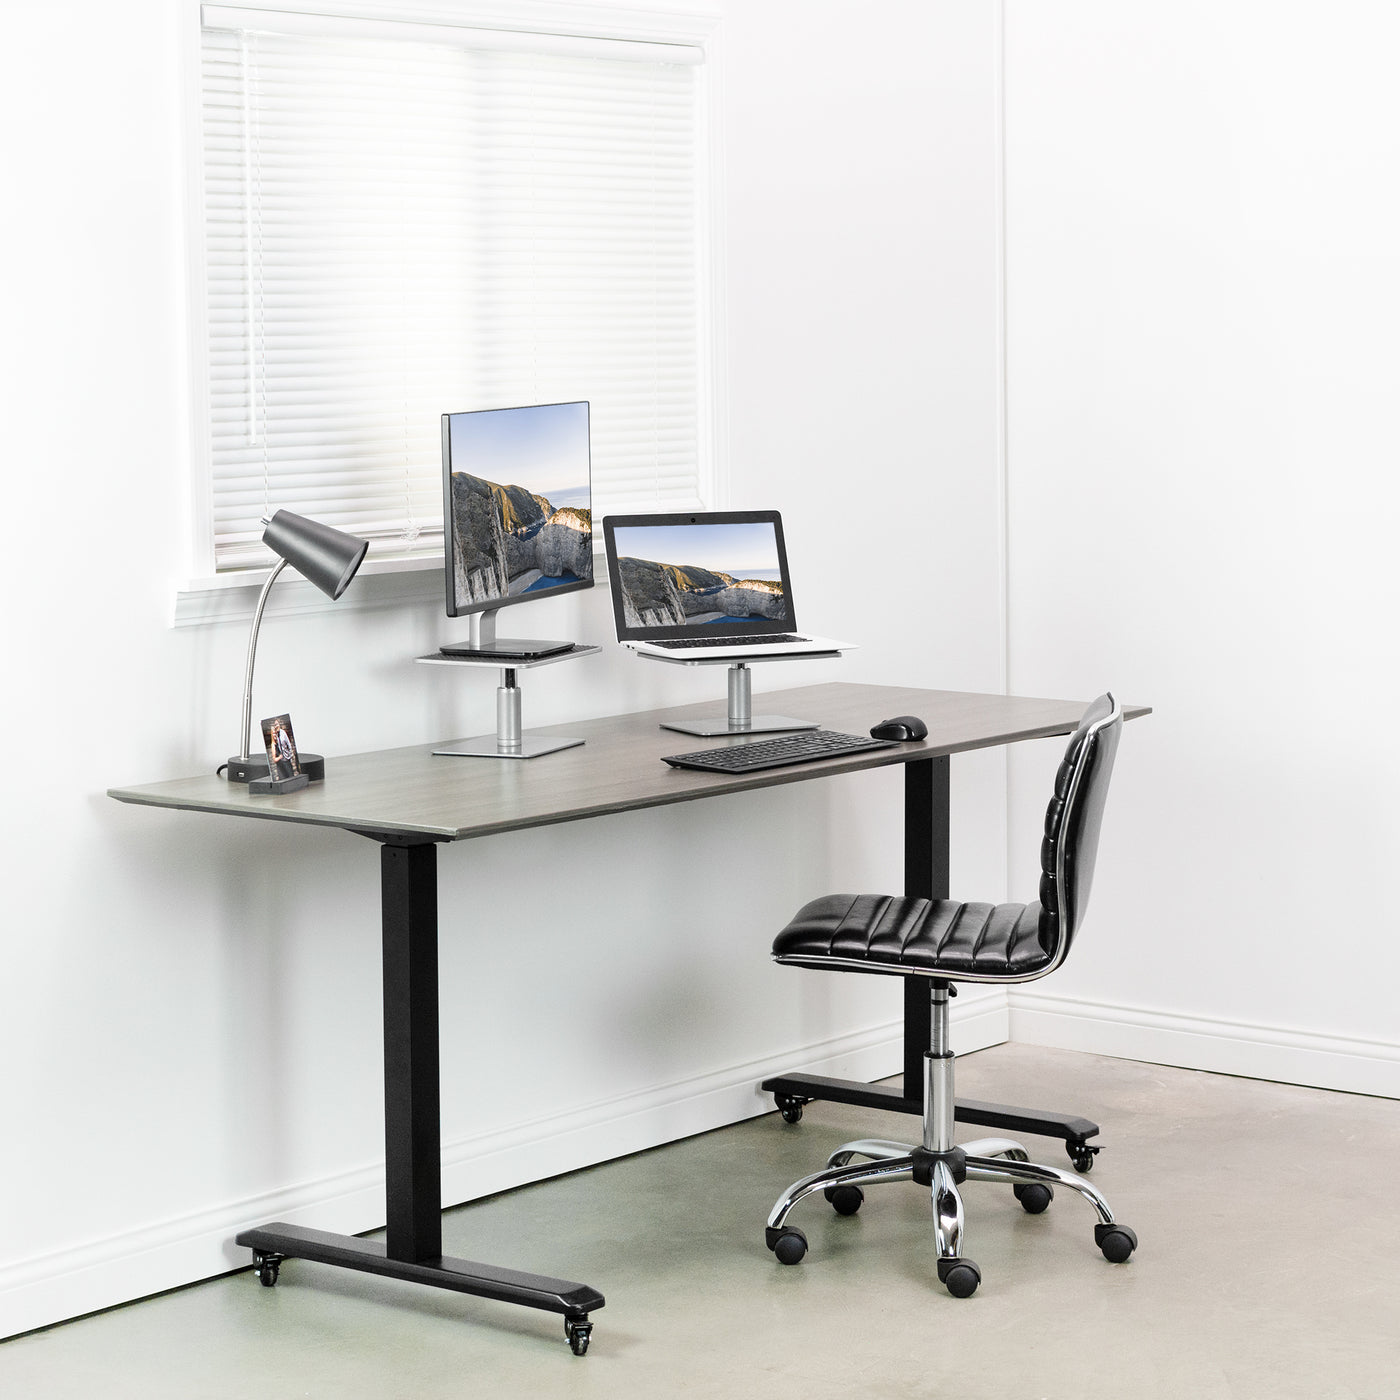 Clamp on desk risers that can elevate speakers, laptops, monitors, lamps, and more.